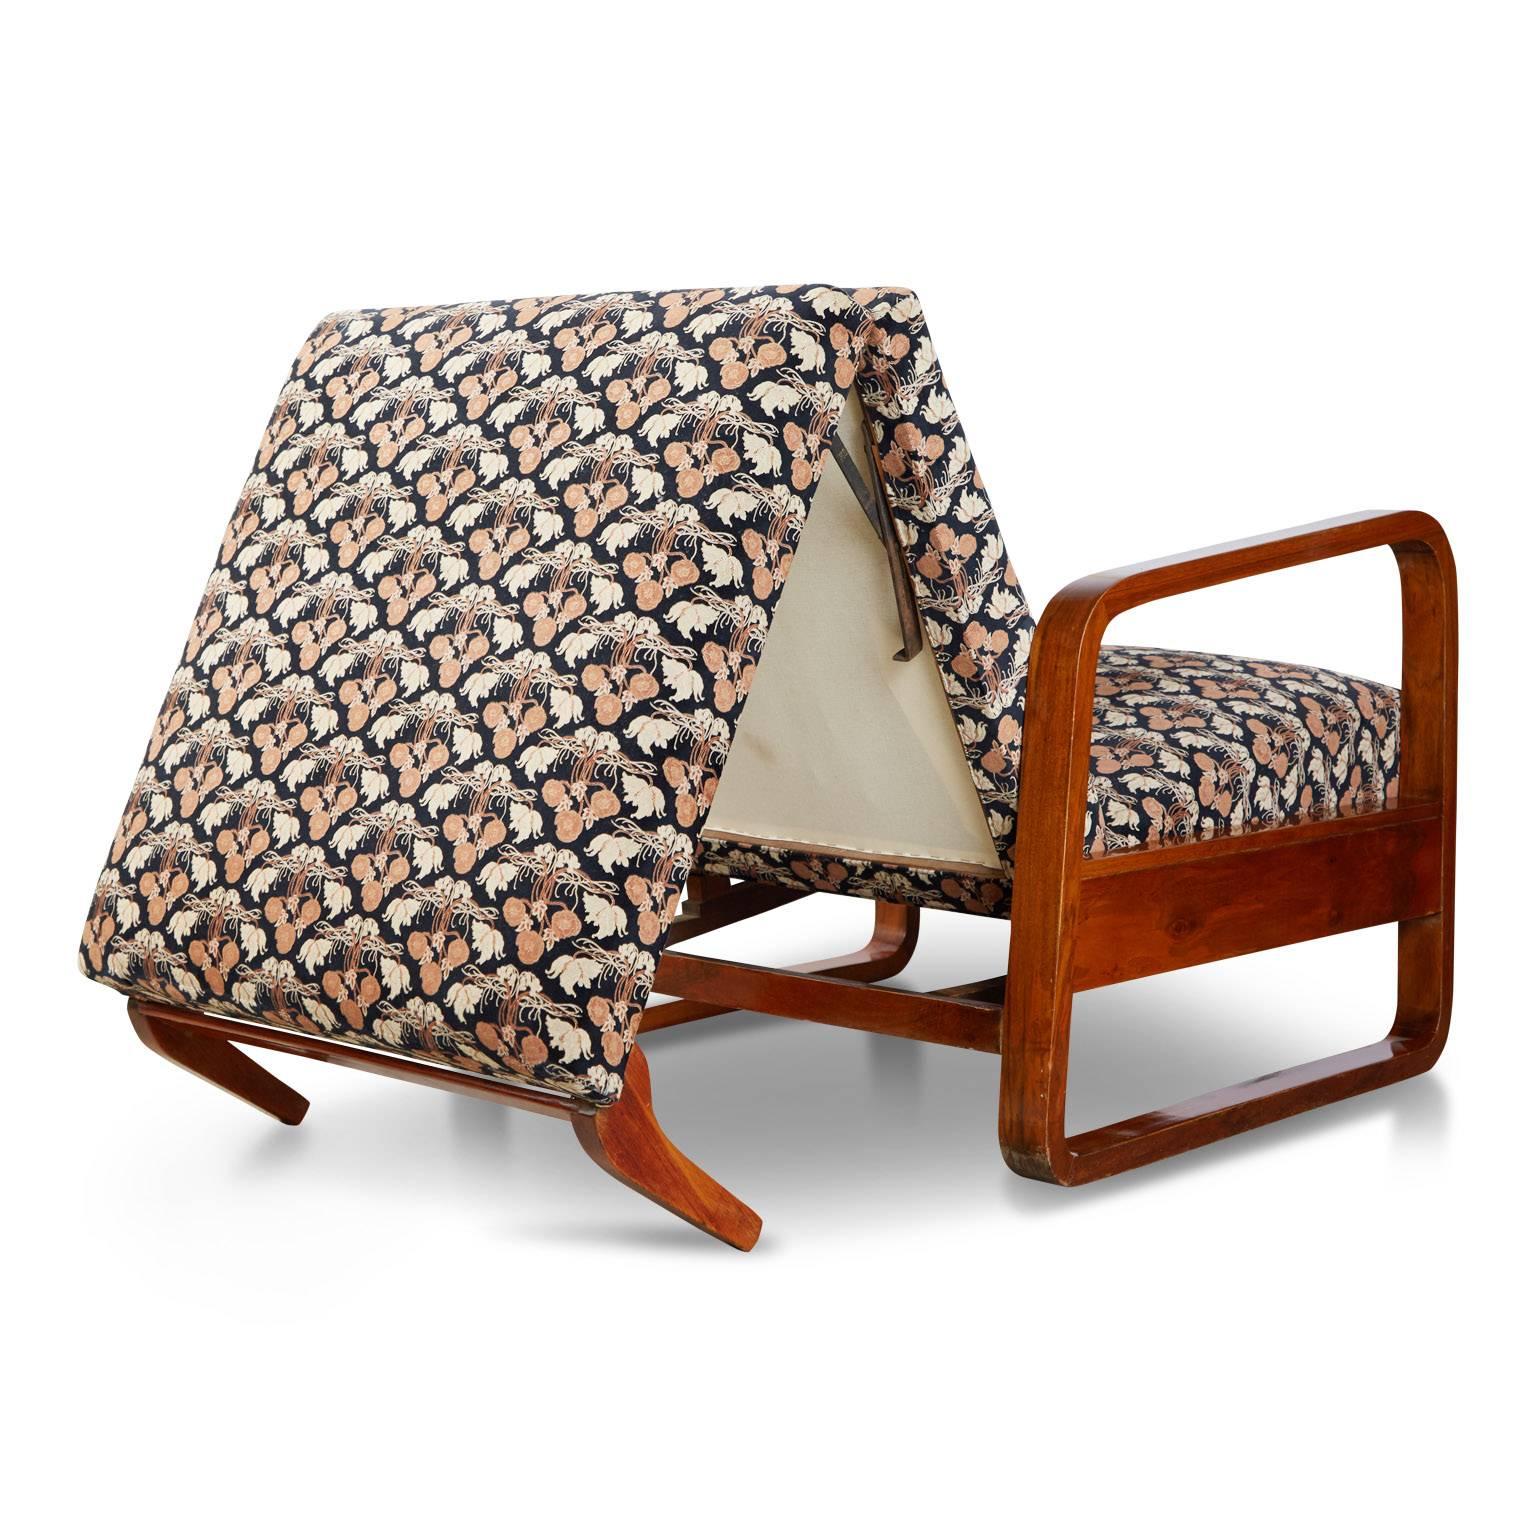 Early 20th Century Art Deco Sleeper Armchair with Fabric Attributed to William Morris, circa 1920